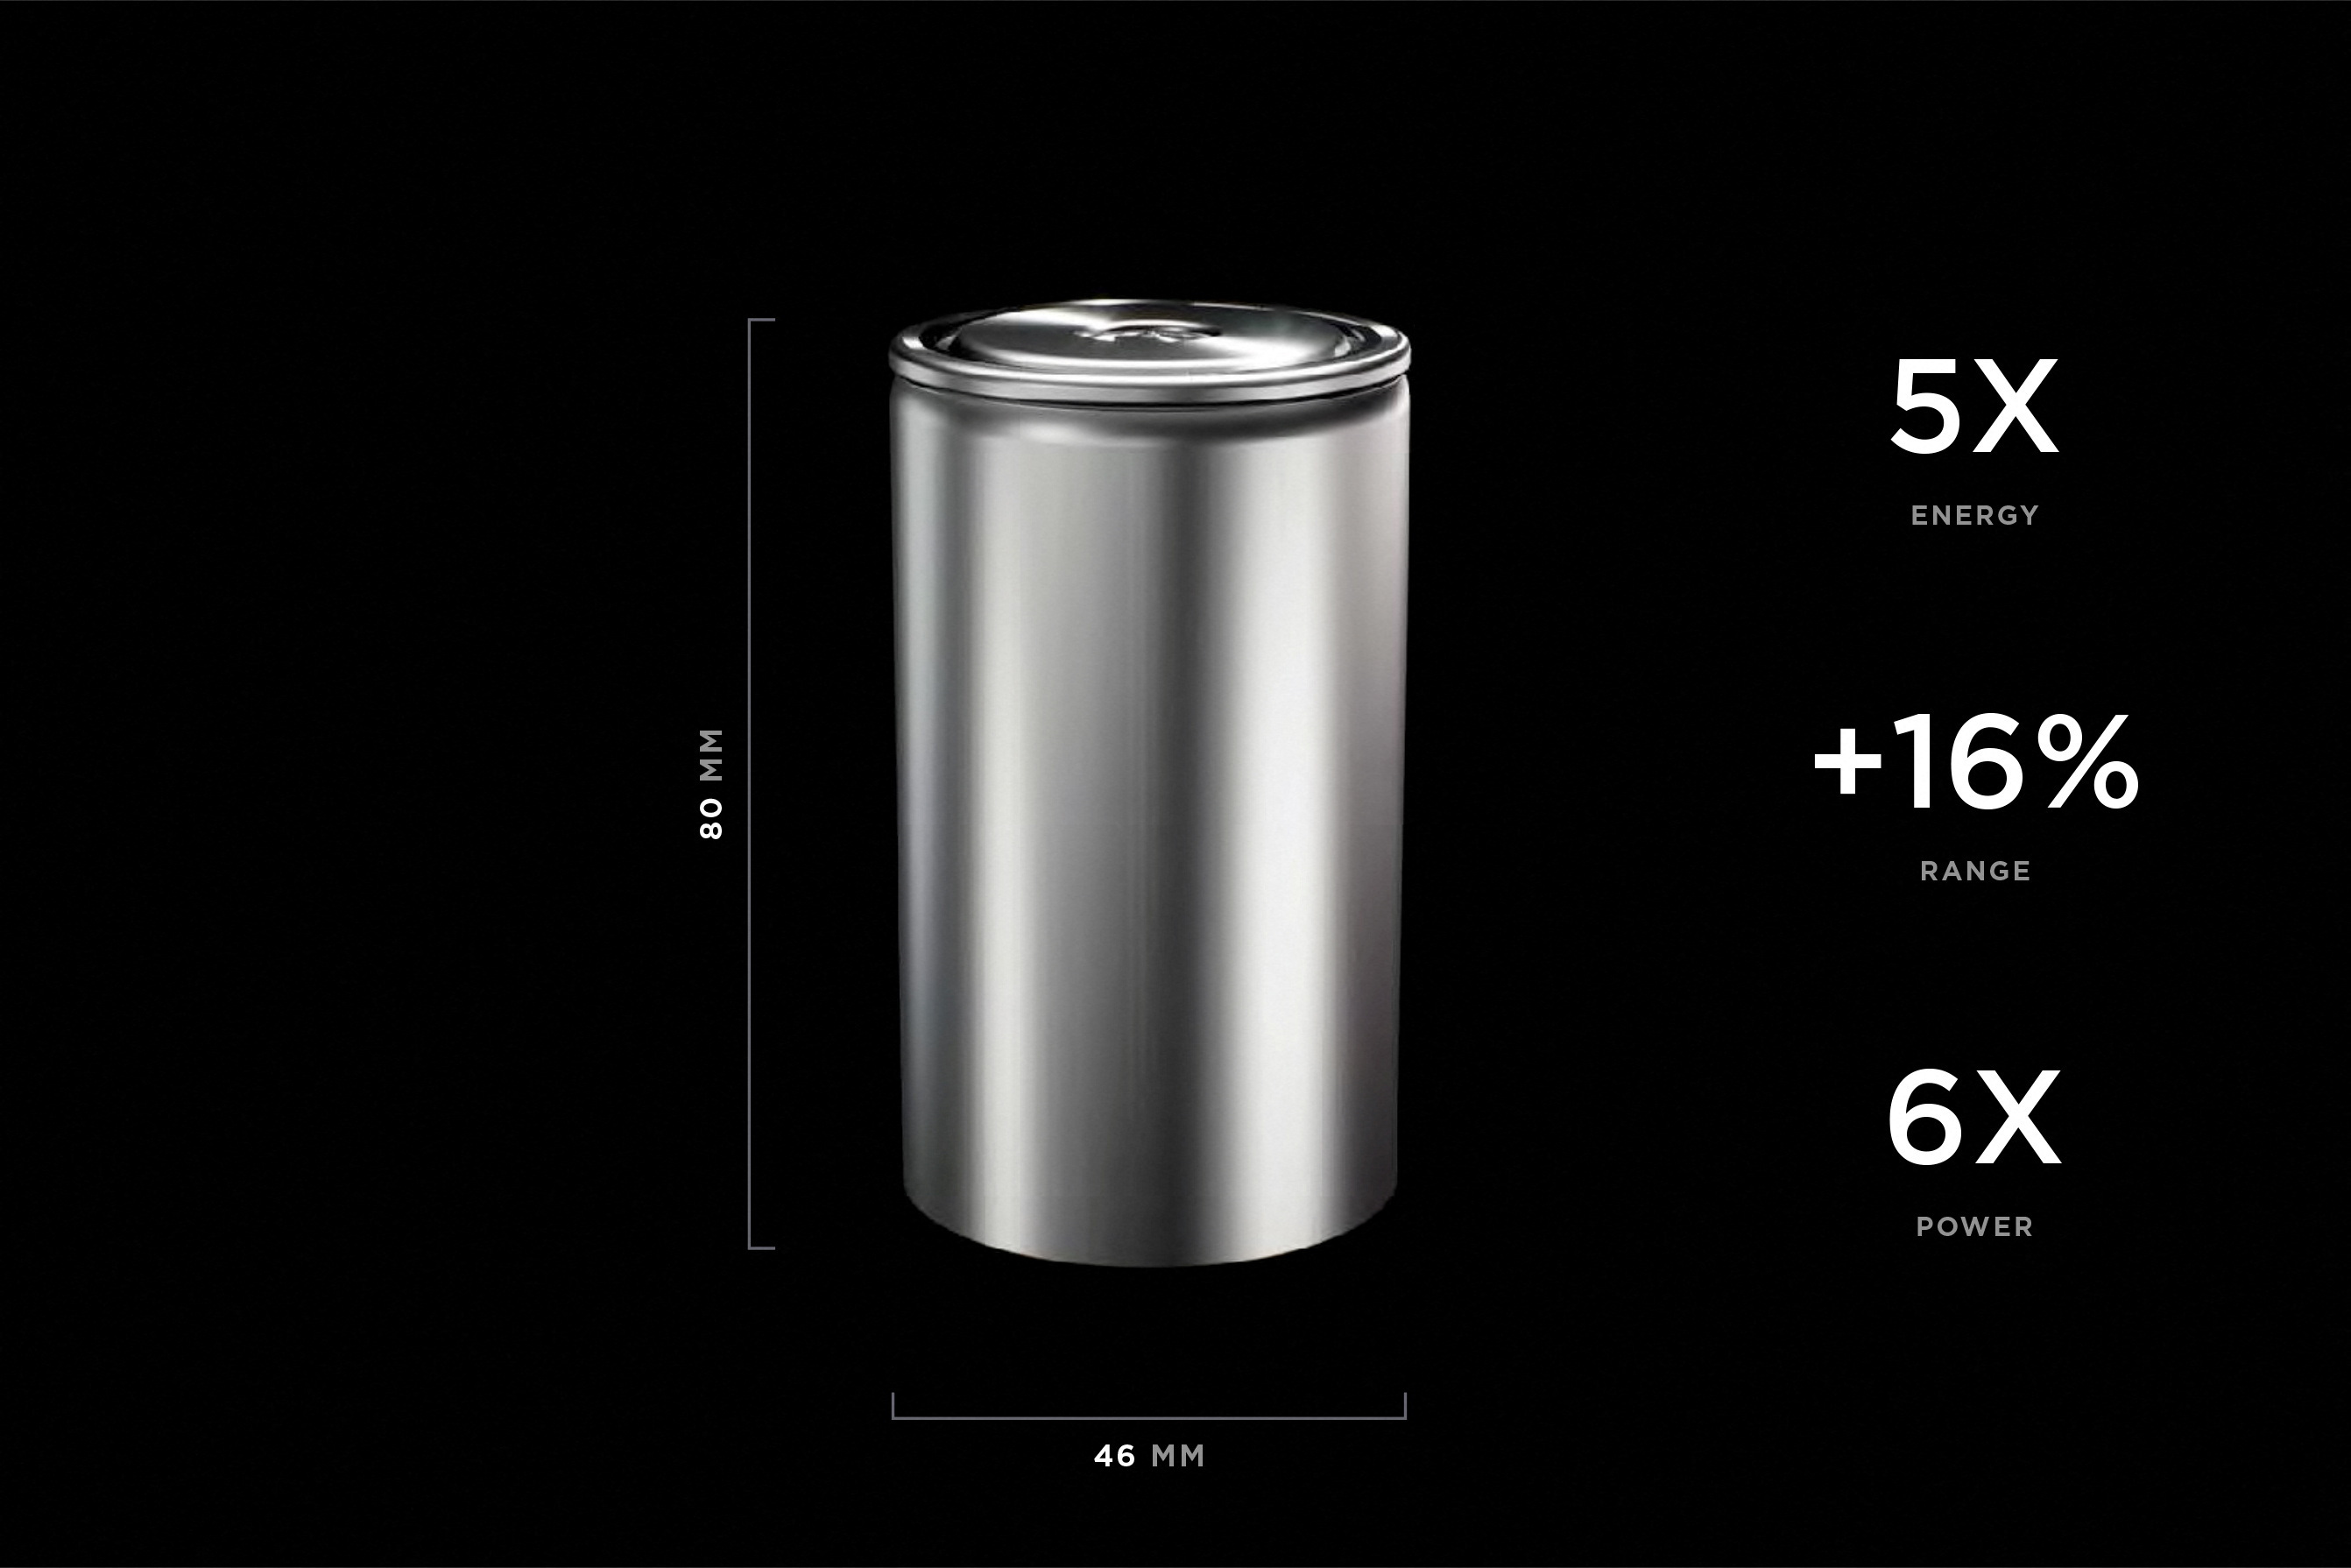 The dimensions of Tesla’s new 4680 battery cell are shown in a shareholder graphic